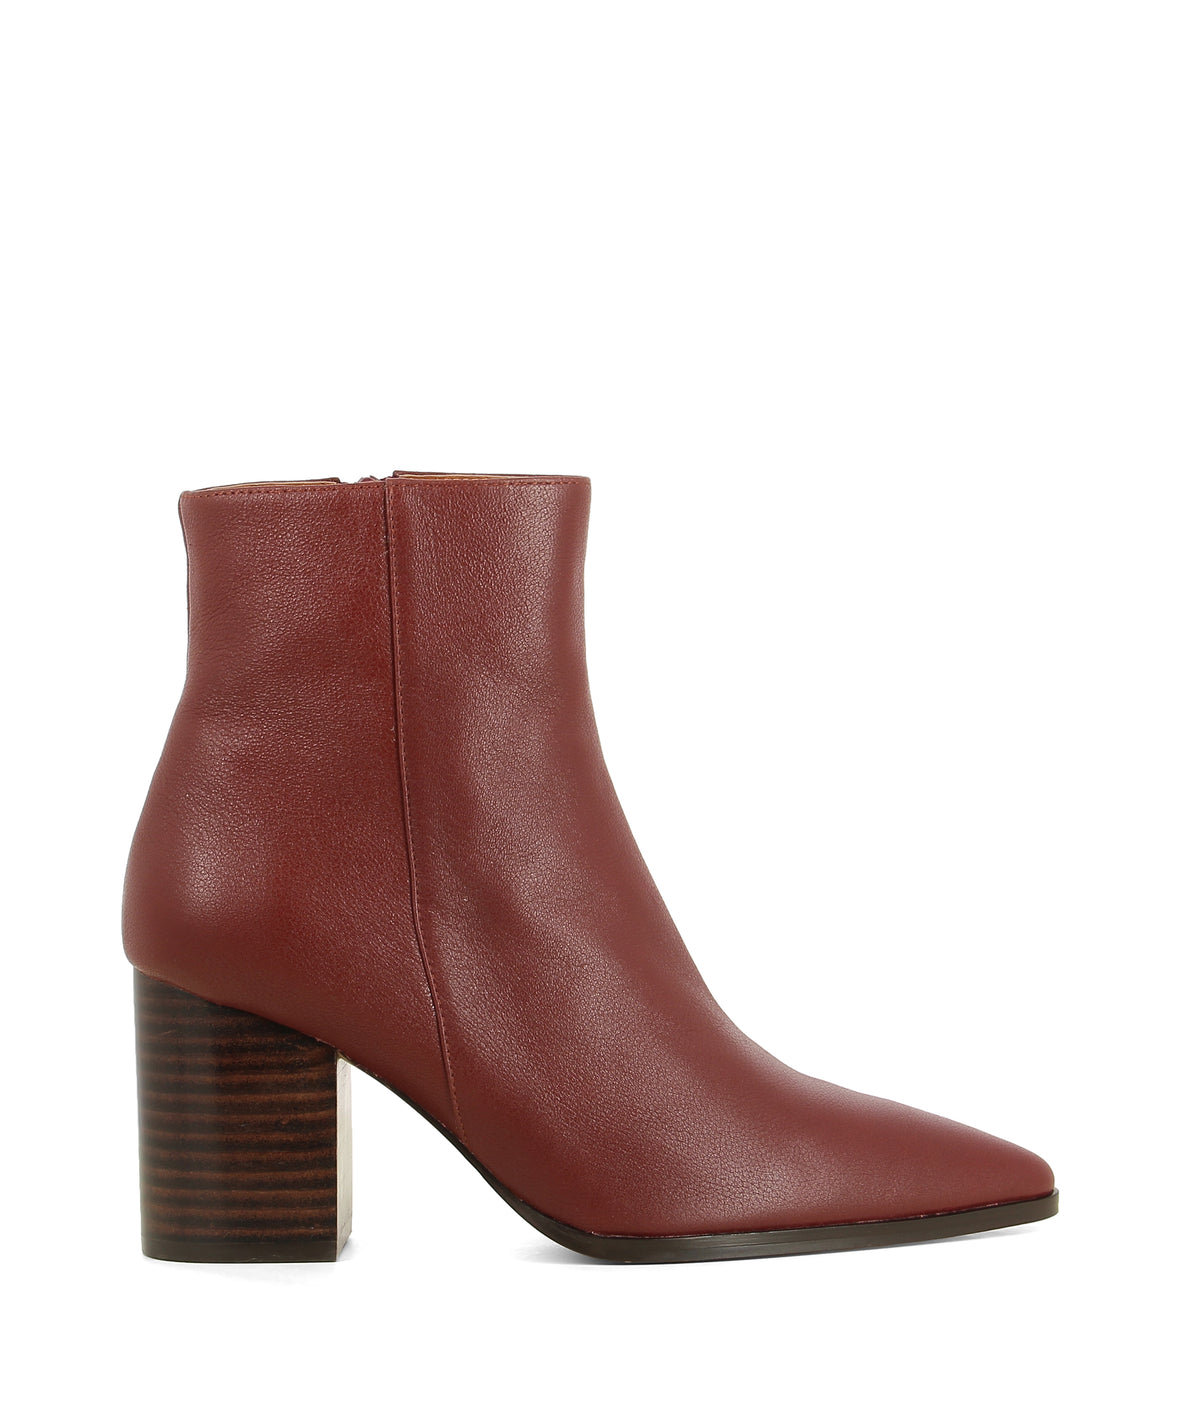 Red Leather Ankle Boots - Women's Shoes 